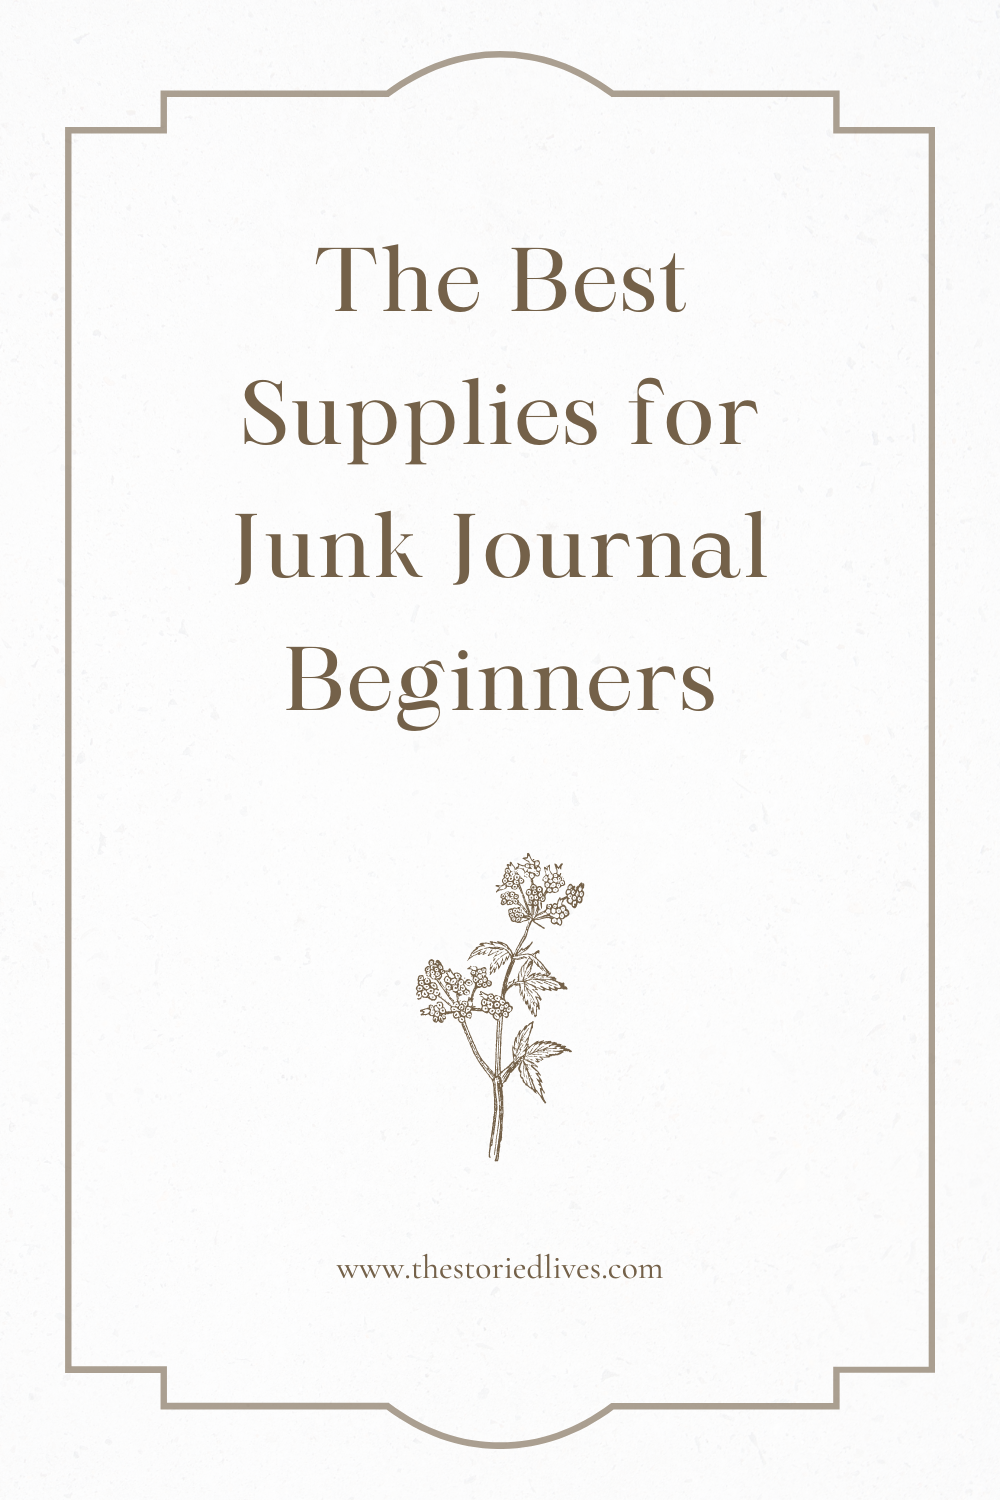 Social media sharing photo that reads “the Best supplies for junk journal beginners”